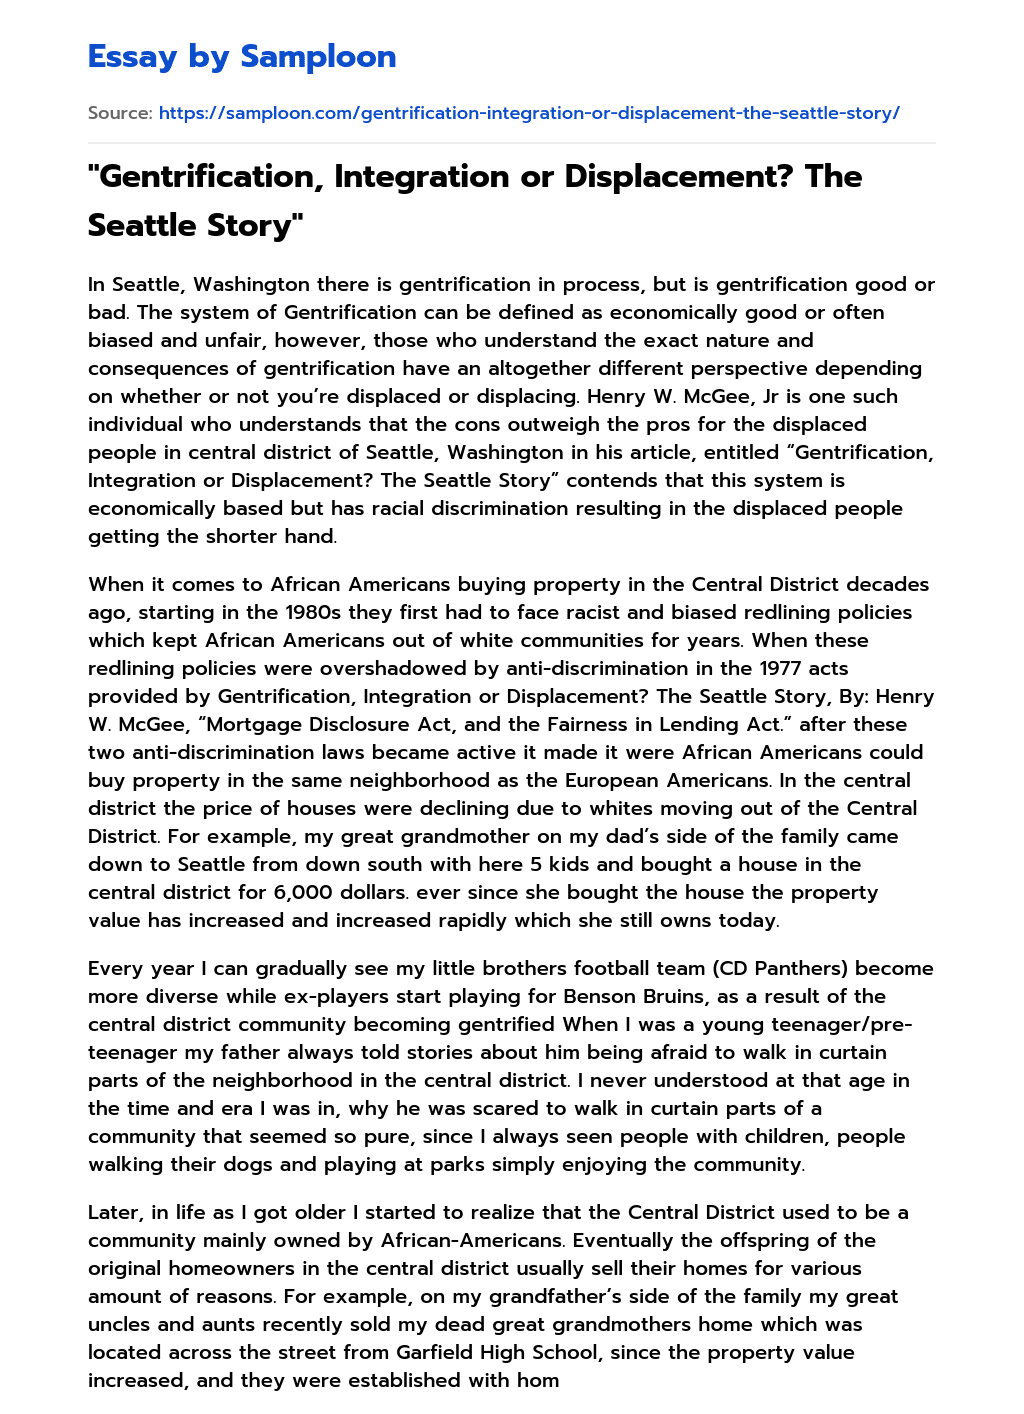 “Gentrification, Integration or Displacement? The Seattle Story” essay